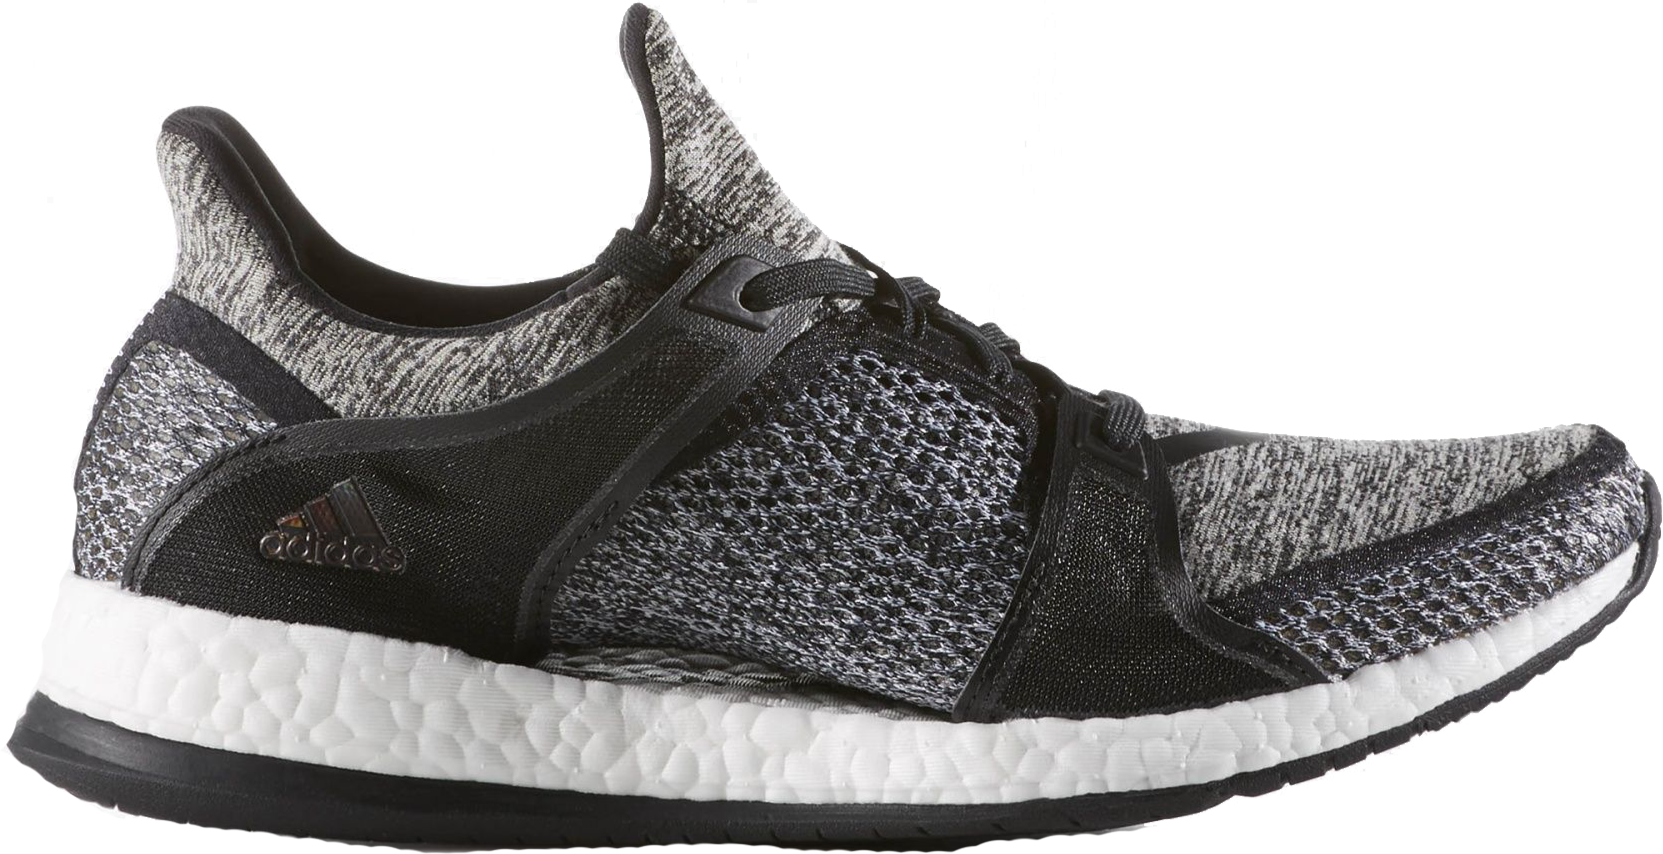 reigning champ x adidas pure boost x trainer